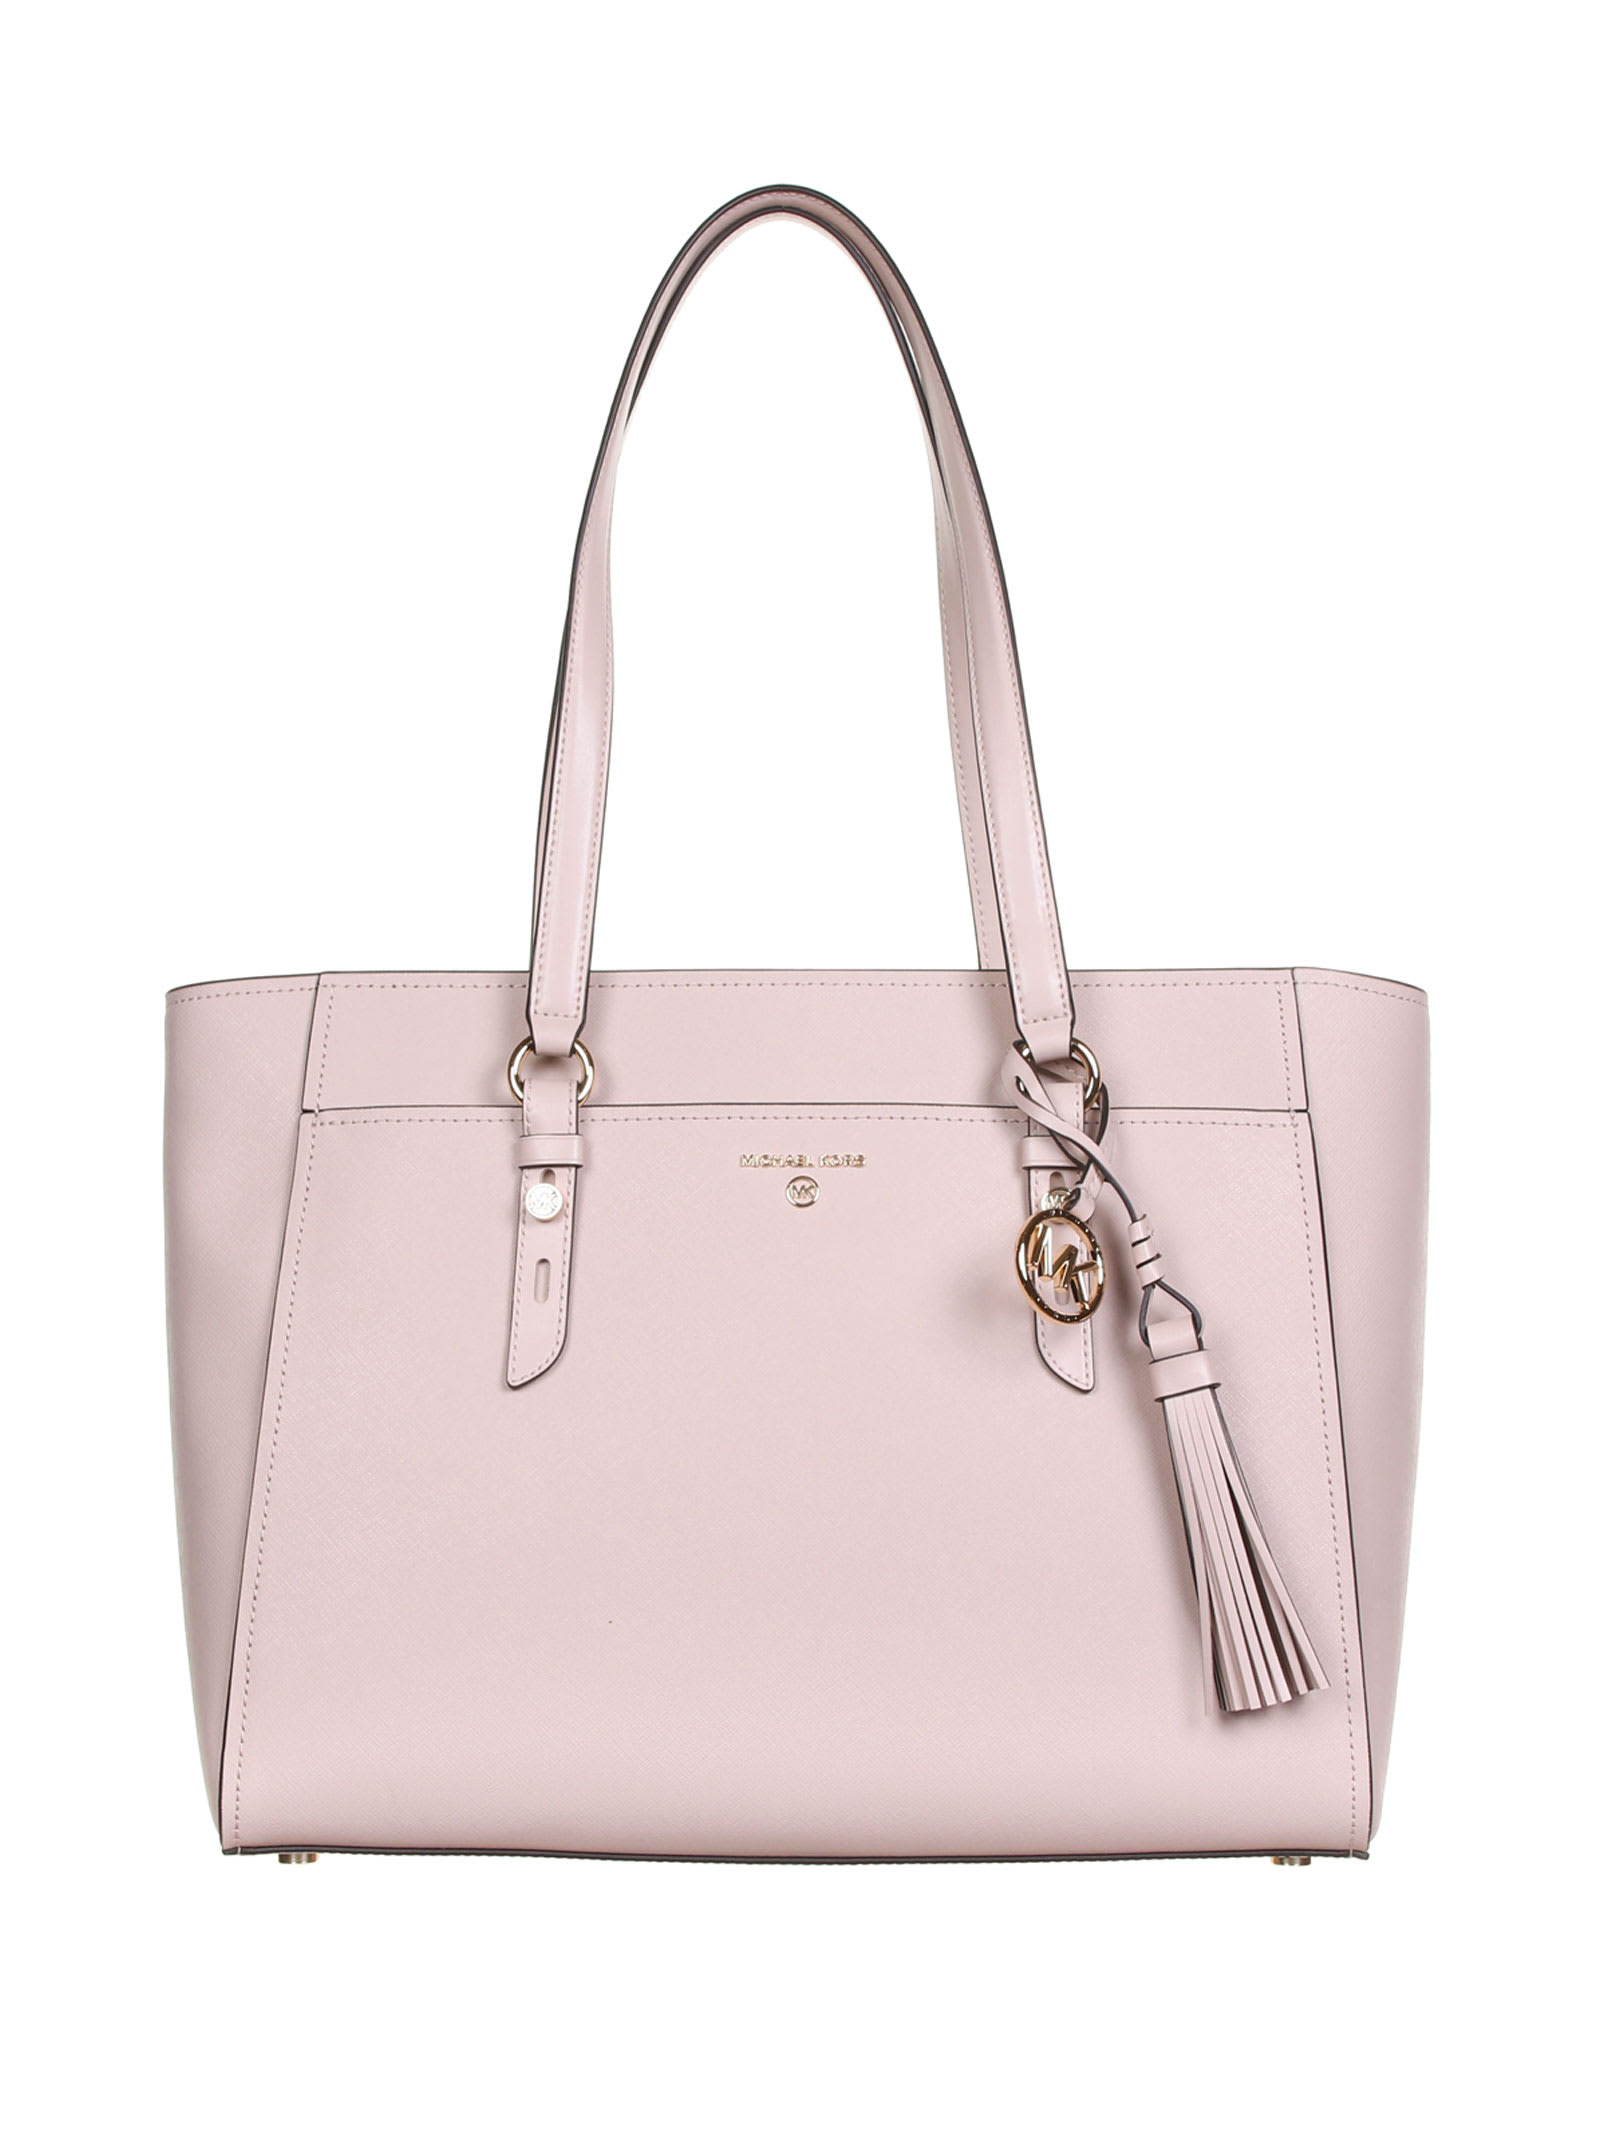 MICHAEL KORS TOTE BAG IN SOFT PINK LEATHER,30S1GNXT7L 187